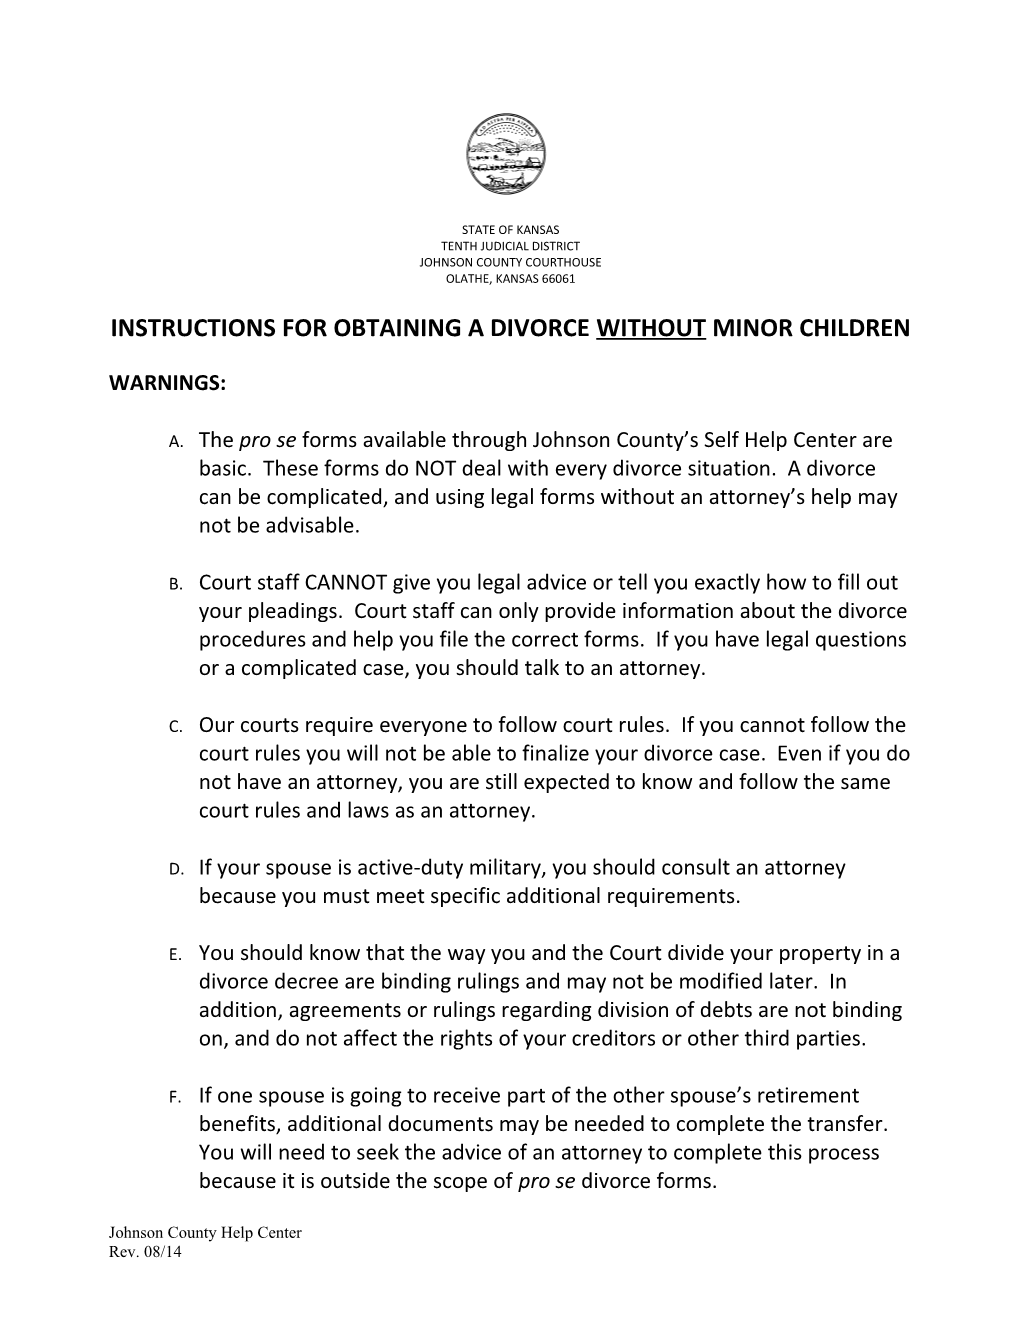 Instructions for Obtaining a Divorce Without Minor Children